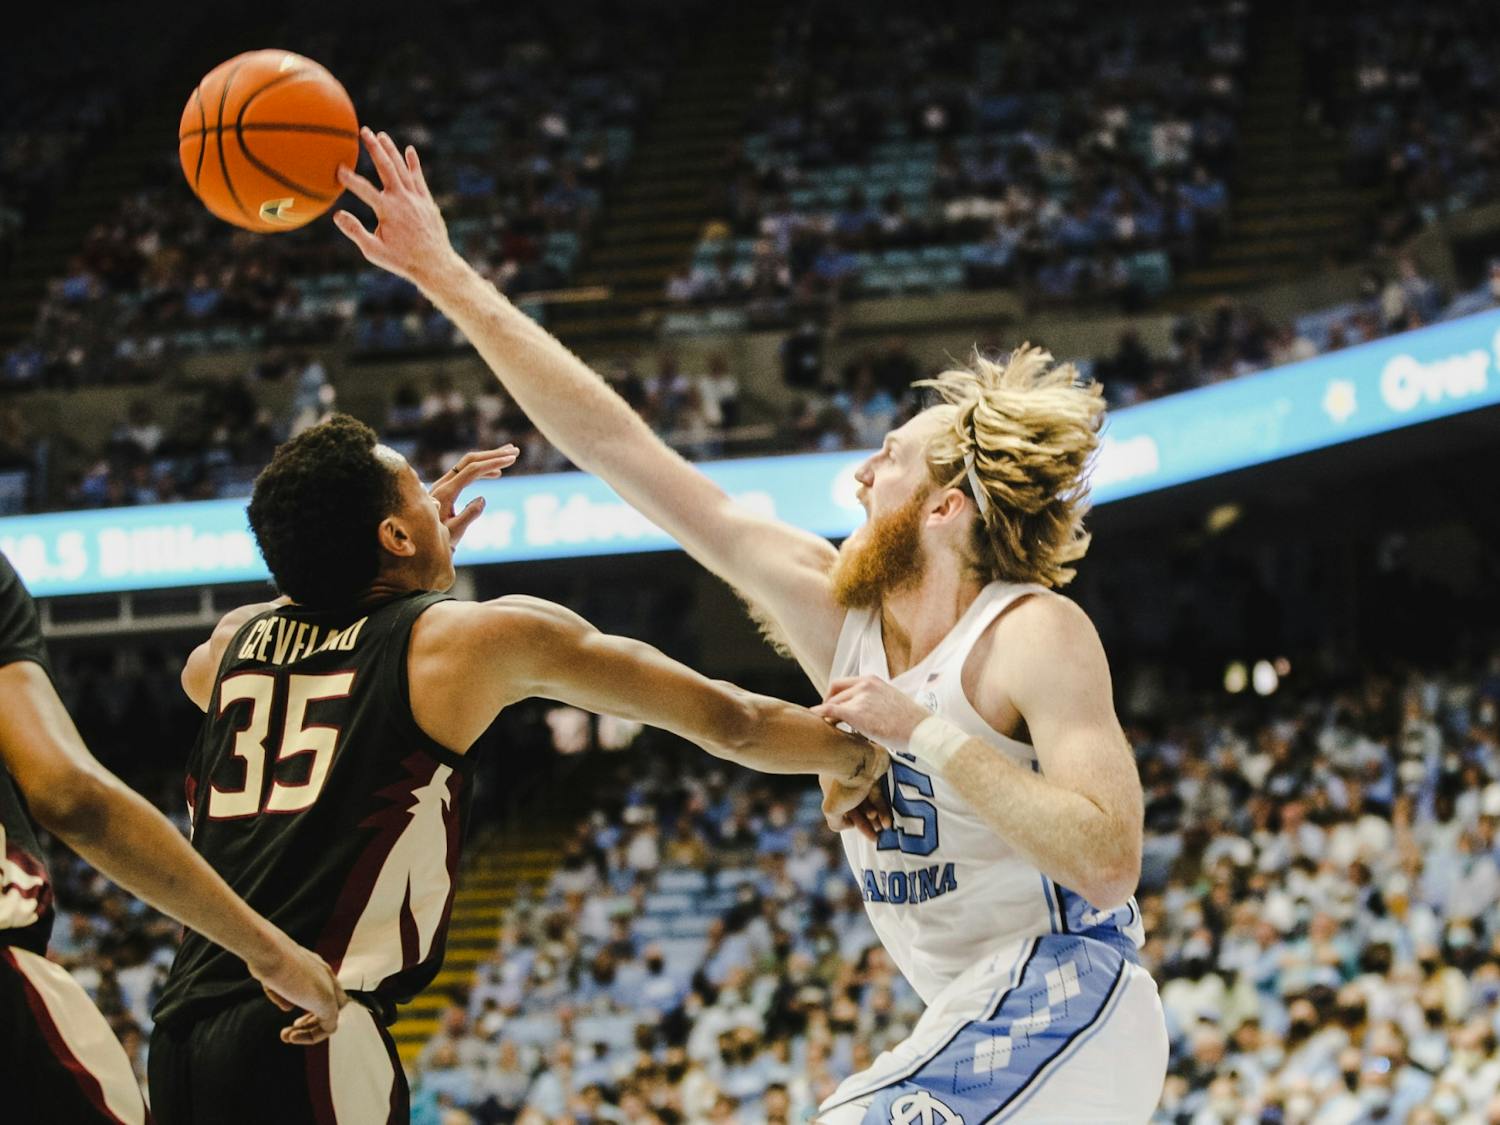 Graduate student forward Brady Manek (45) fights for the ball during the home men's basketball game against Florida State on Saturday, Feb. 12, 2022. The Tar Heels won 94-74 in the Dean Dome.